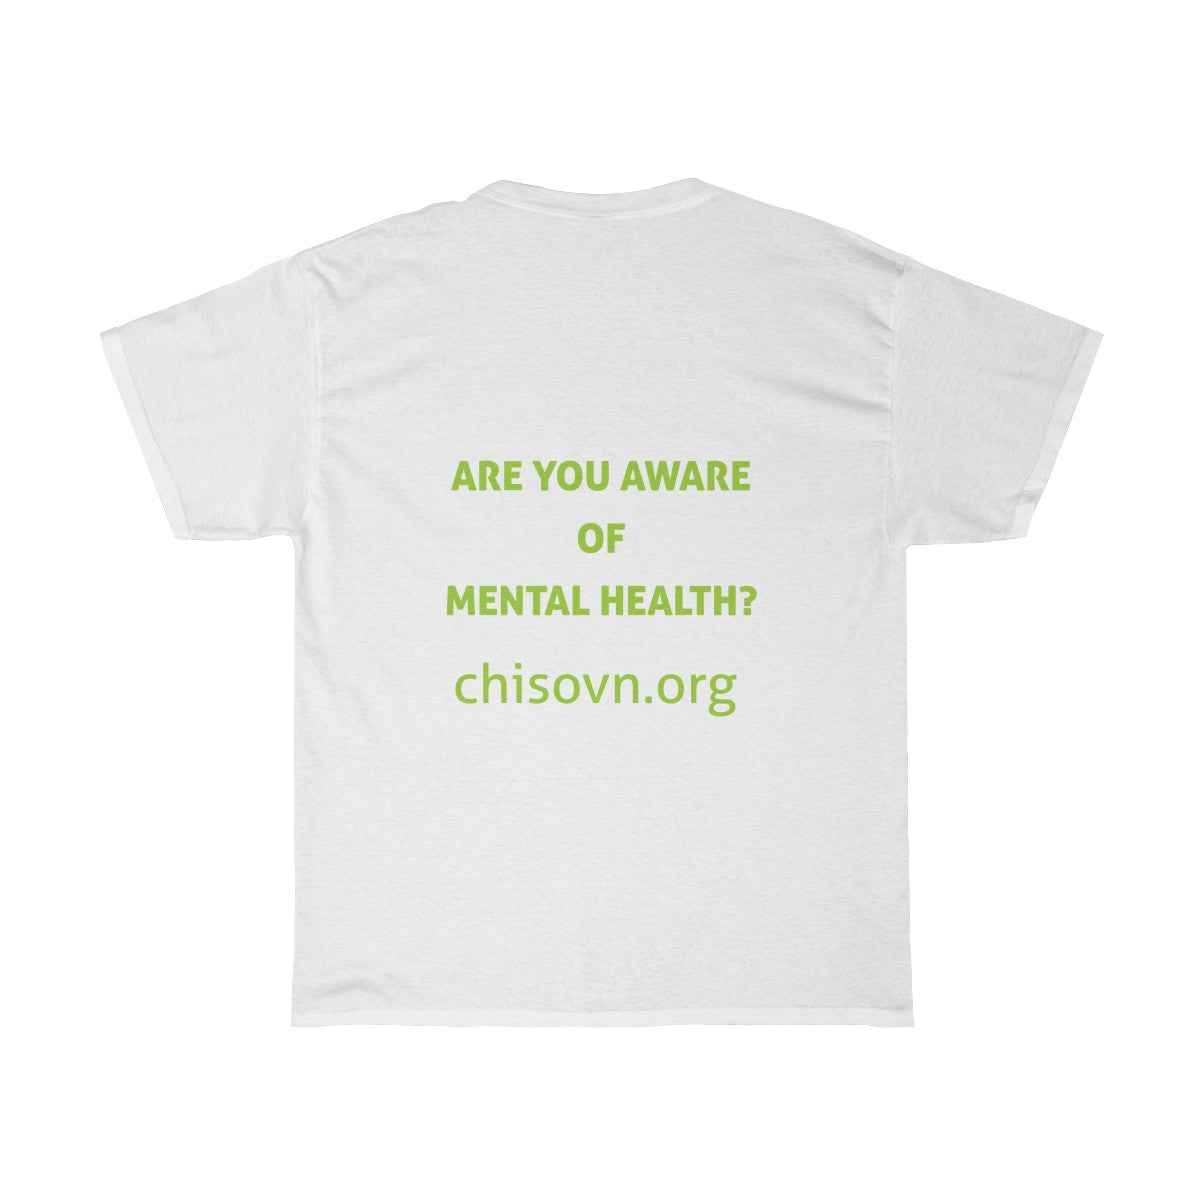 Have You Tried Getting Help? Unisex Cotton Tee